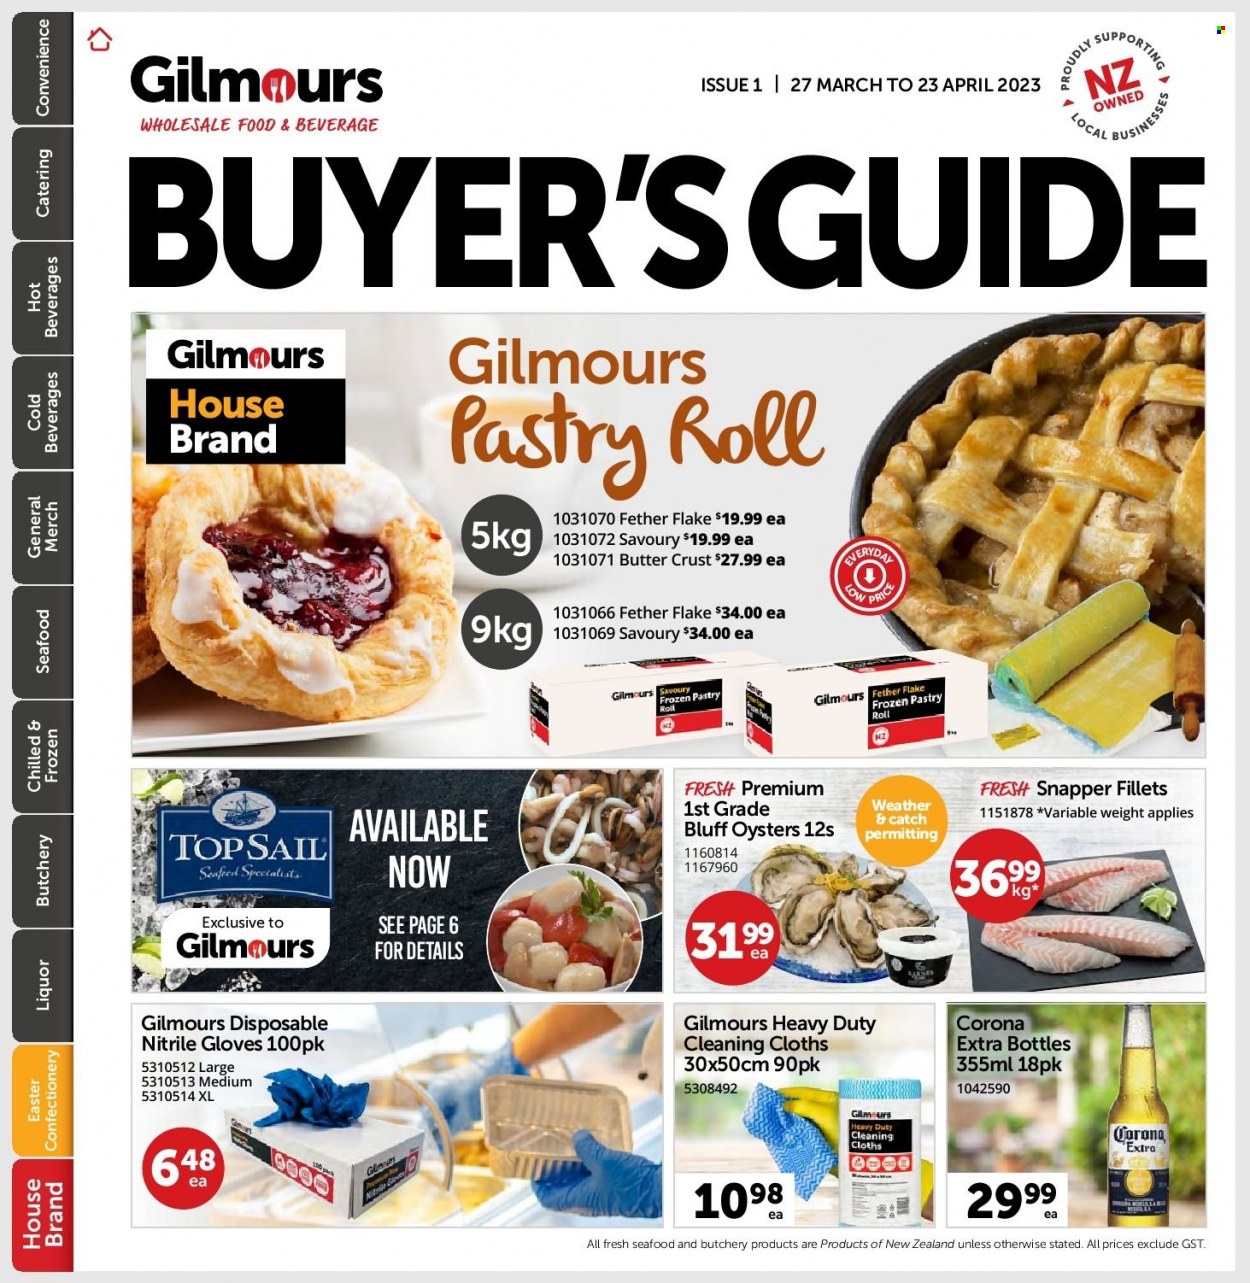 thumbnail - Gilmours mailer - 27.03.2023 - 23.04.2023 - Sales products - oysters, seafood, butter, beer, Corona Extra. Page 1.